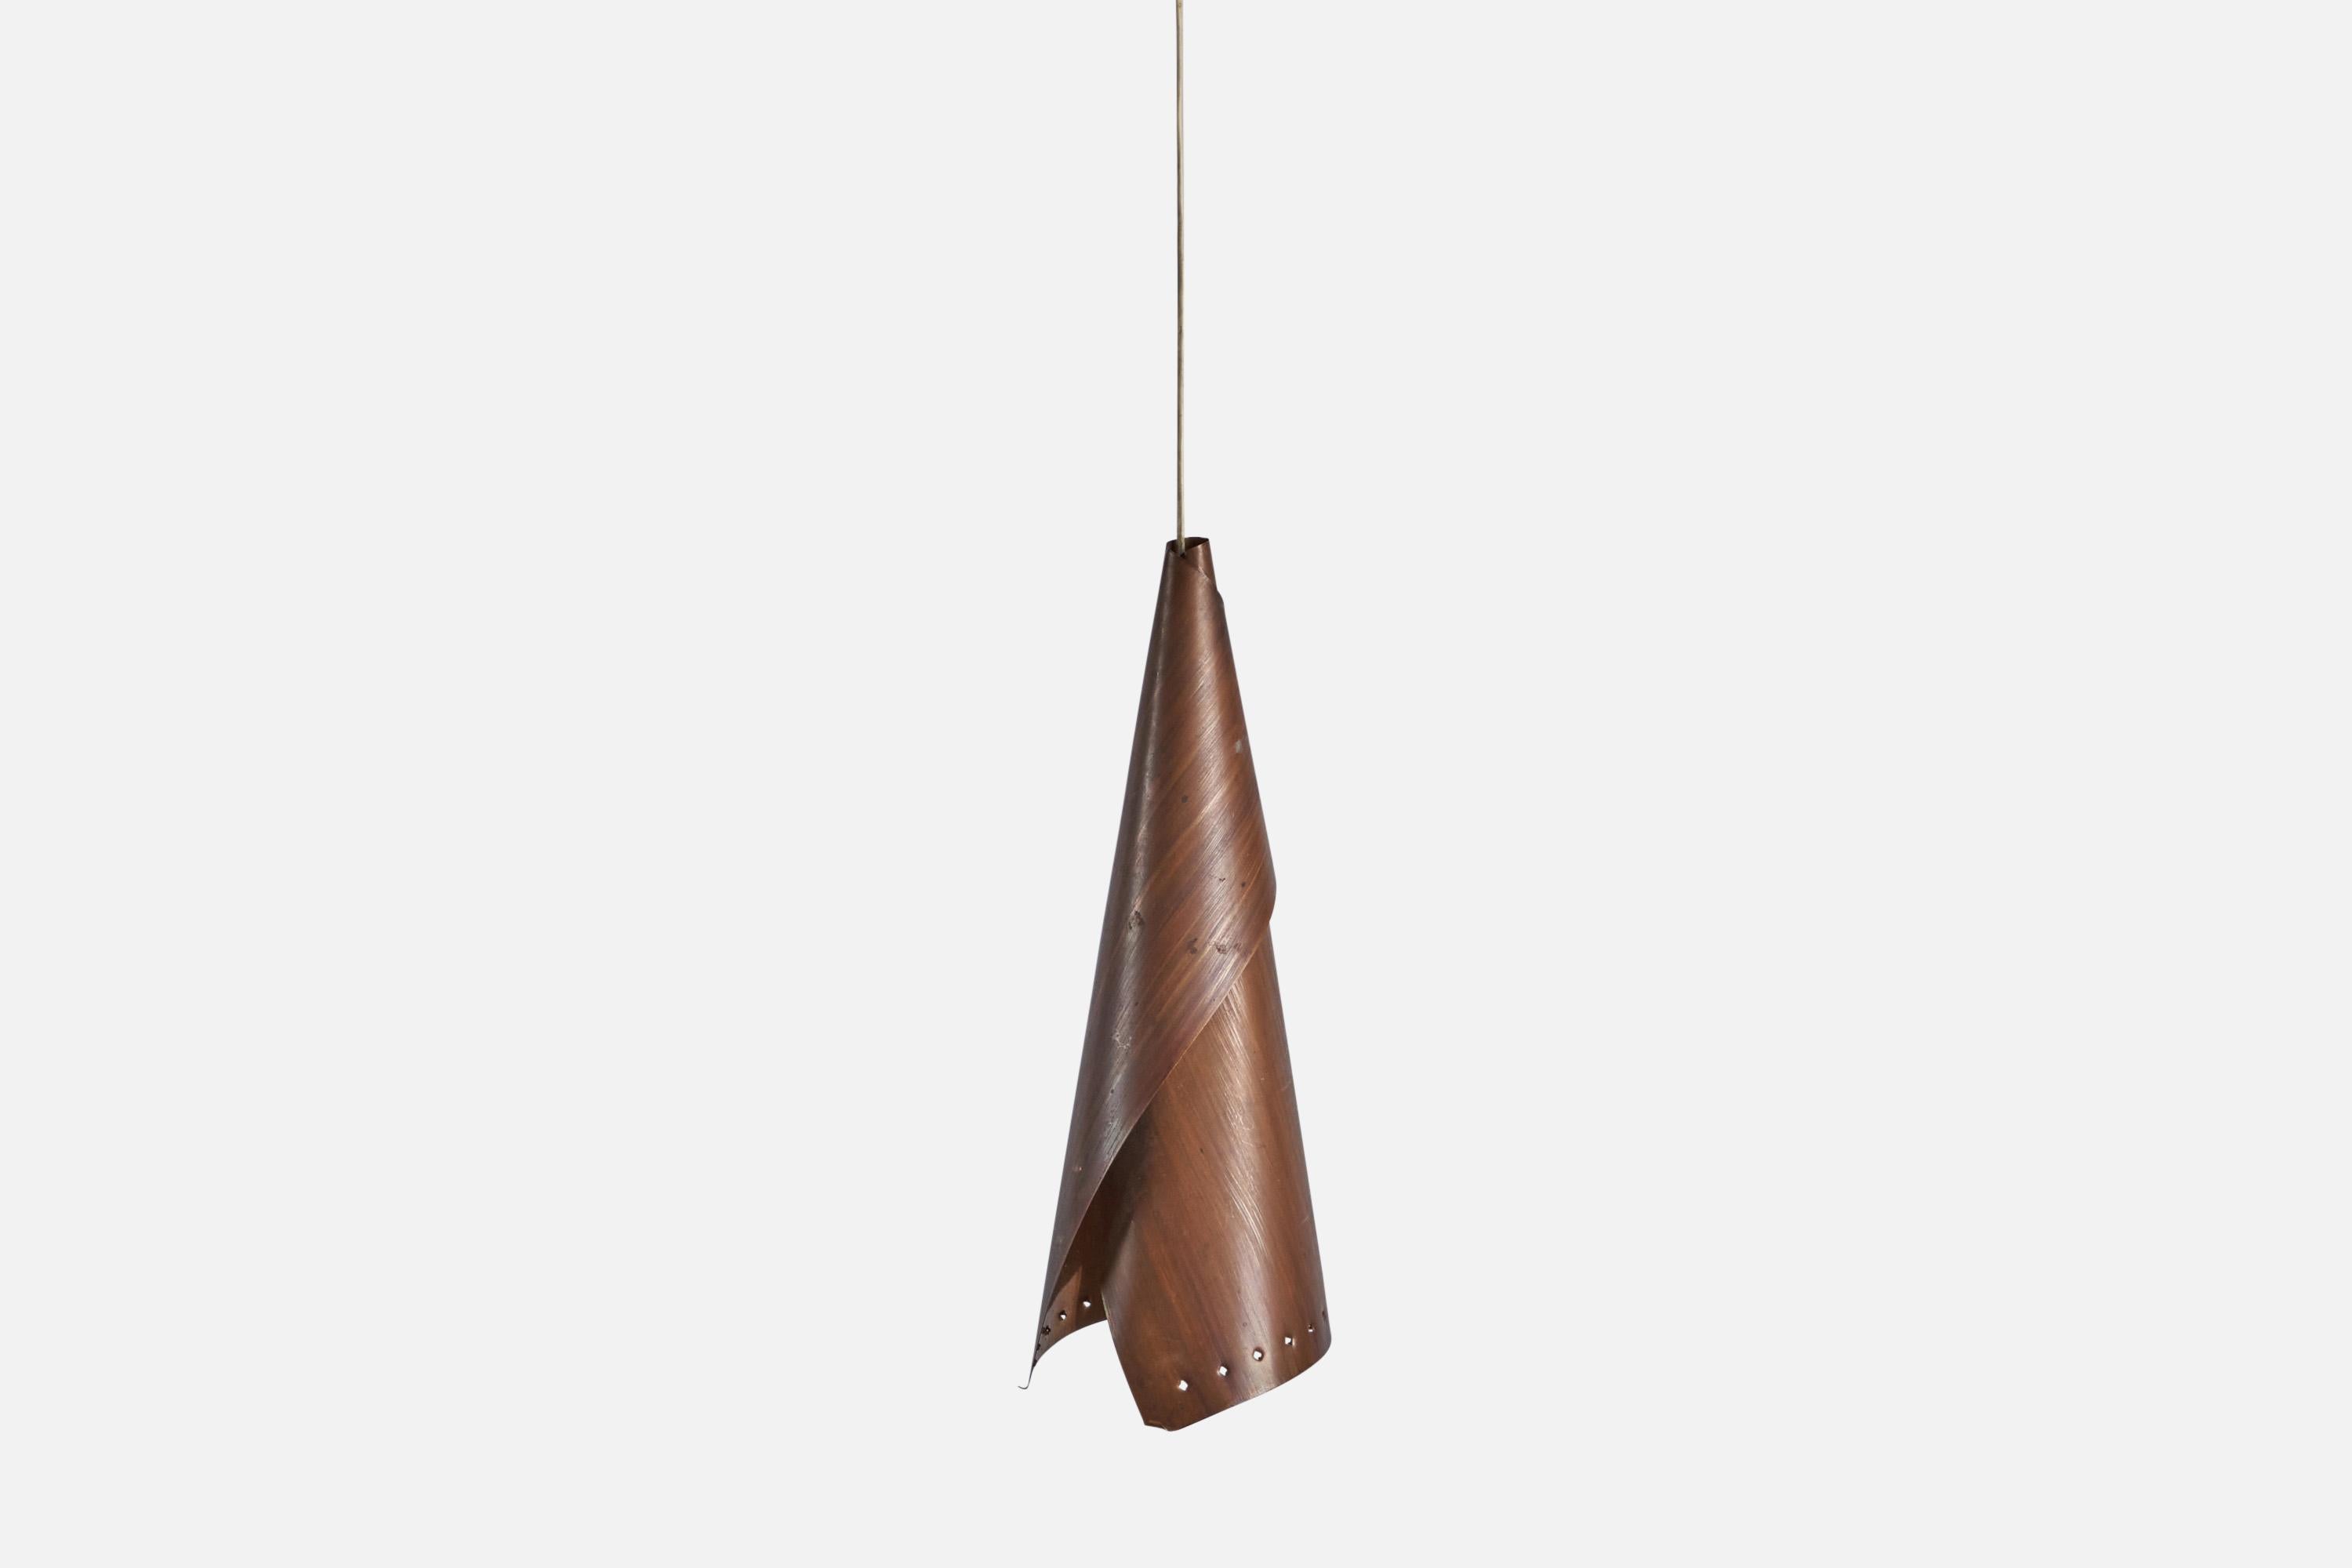 A copper pendant designed and produced in Sweden, c. 1960s.

Overall Dimensions (inches): 22” H x 7” Diameter
Bulb Specifications: E-26 Bulb
Number of Sockets: 1
Variable drop length 